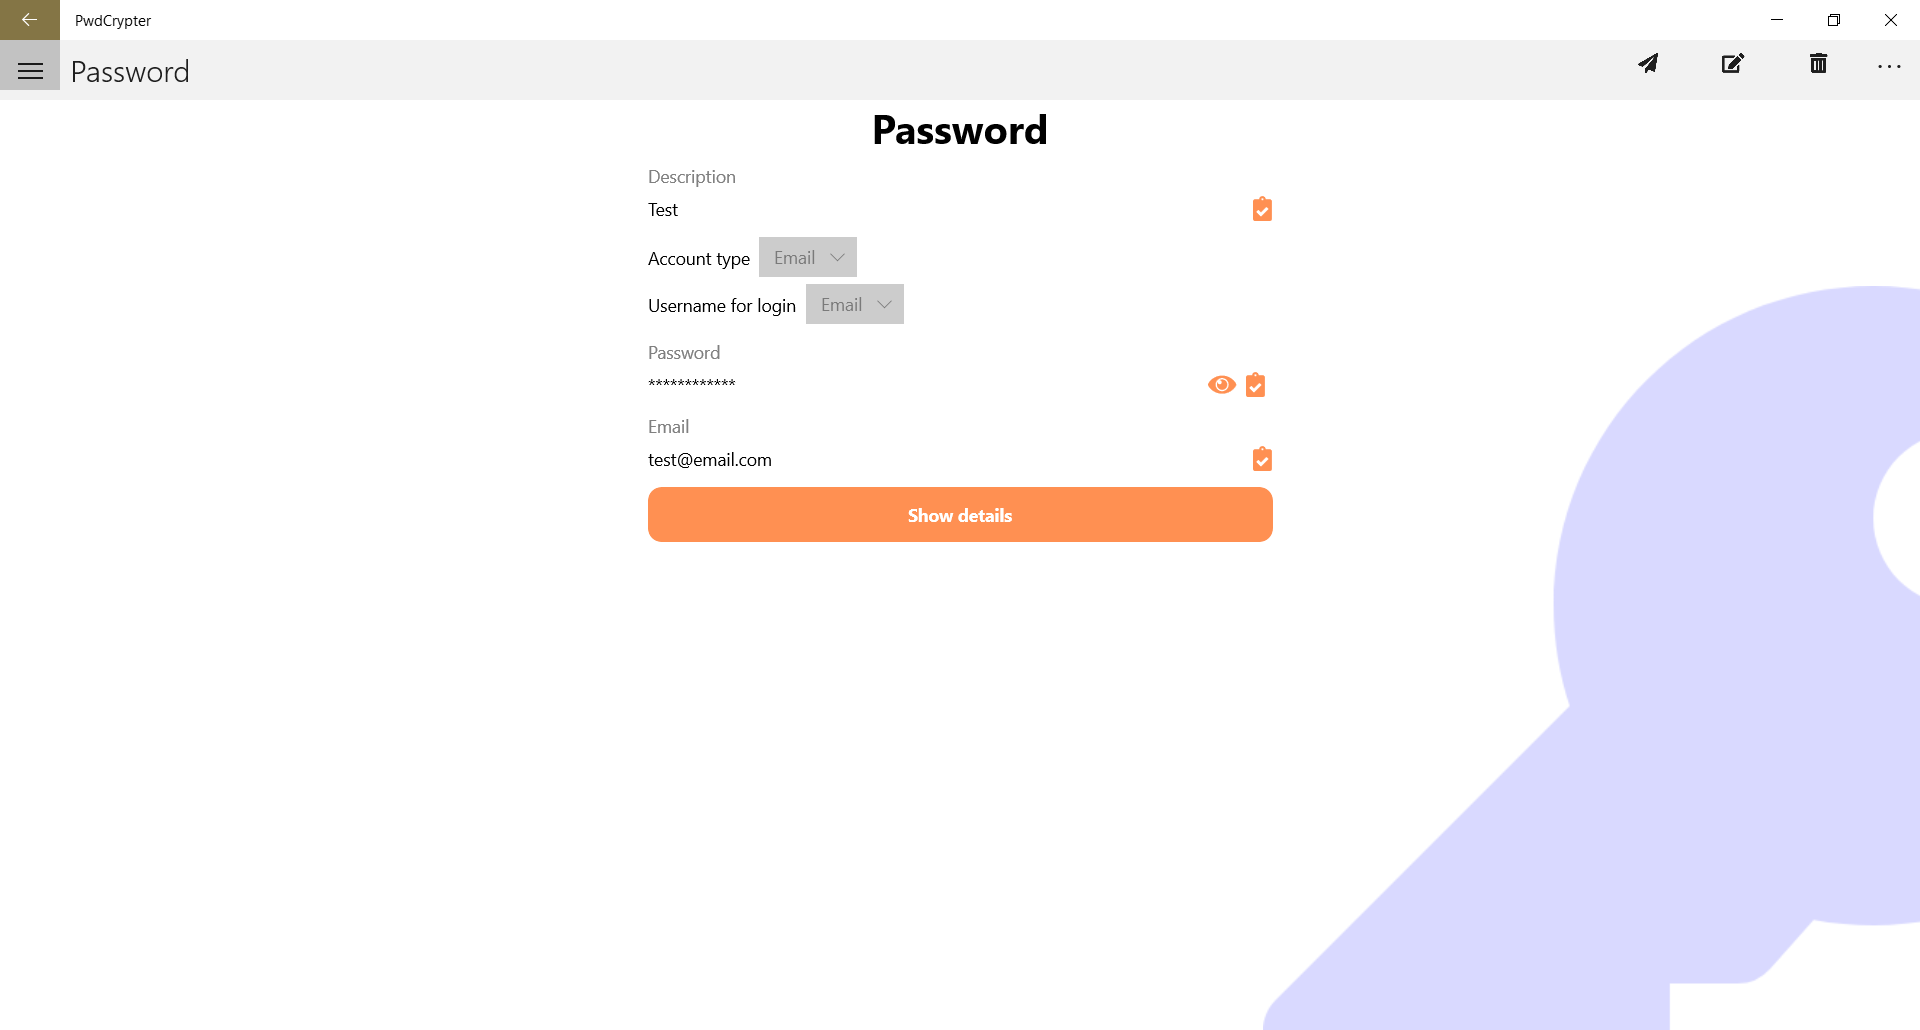 Creation of a new password. You can add additional information by a specific button